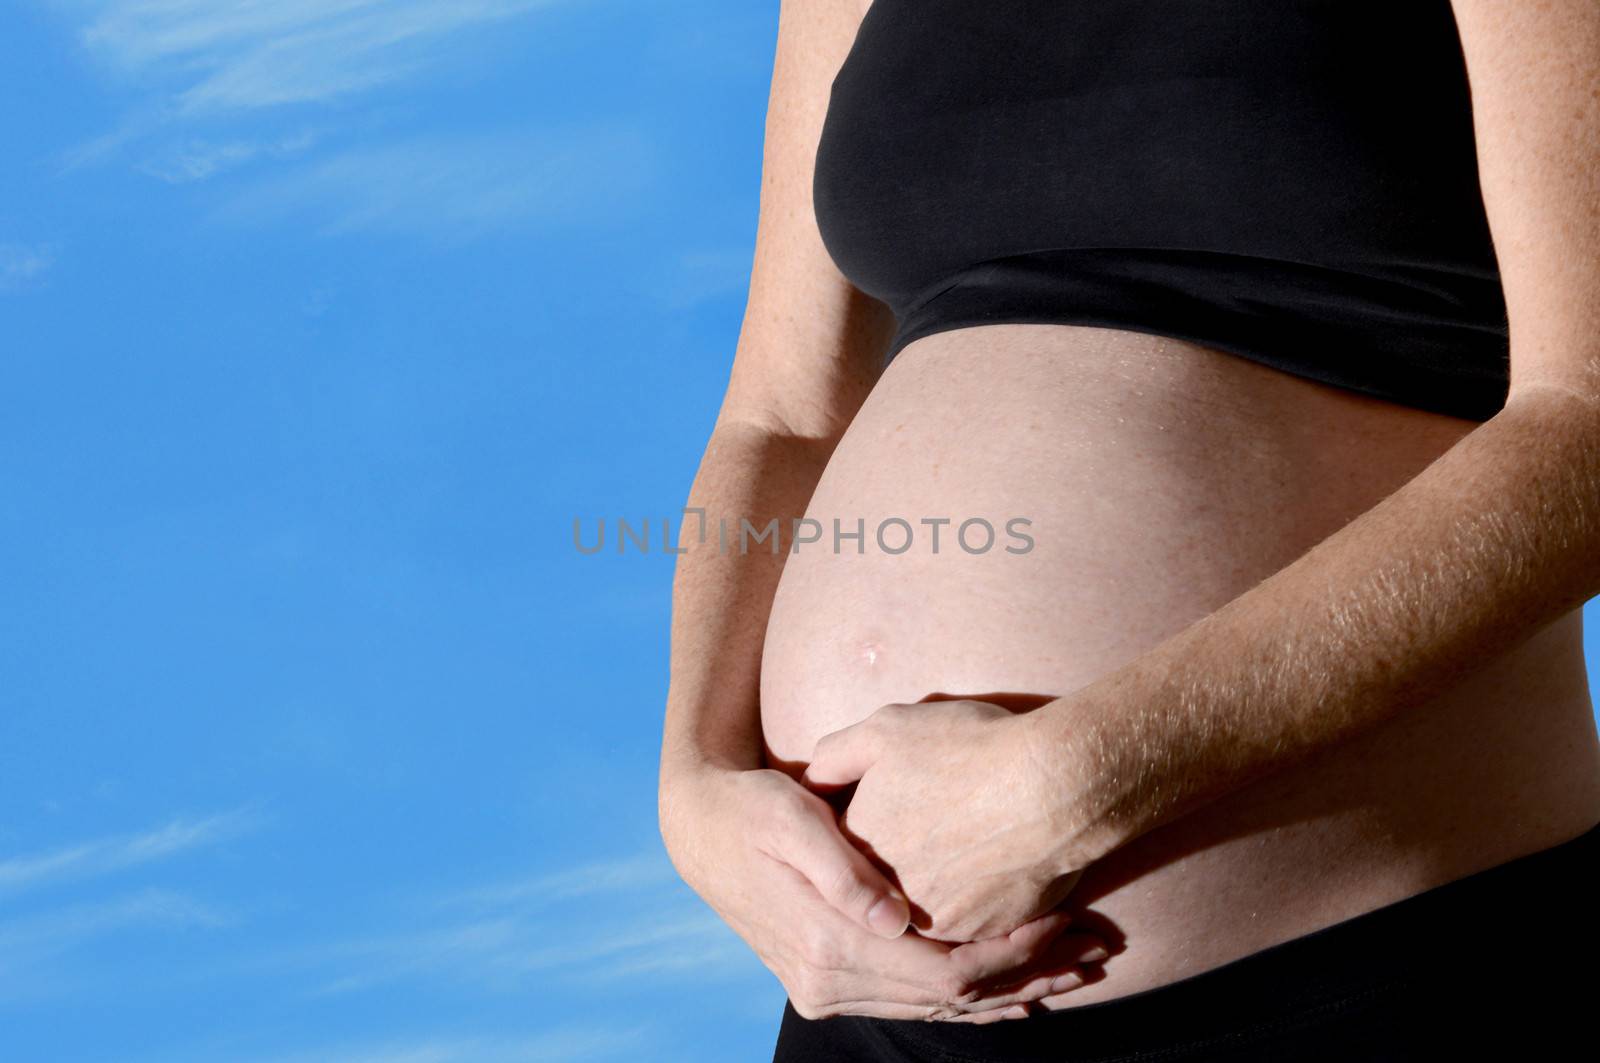 constipation or indigestion and pregnancy on sky background